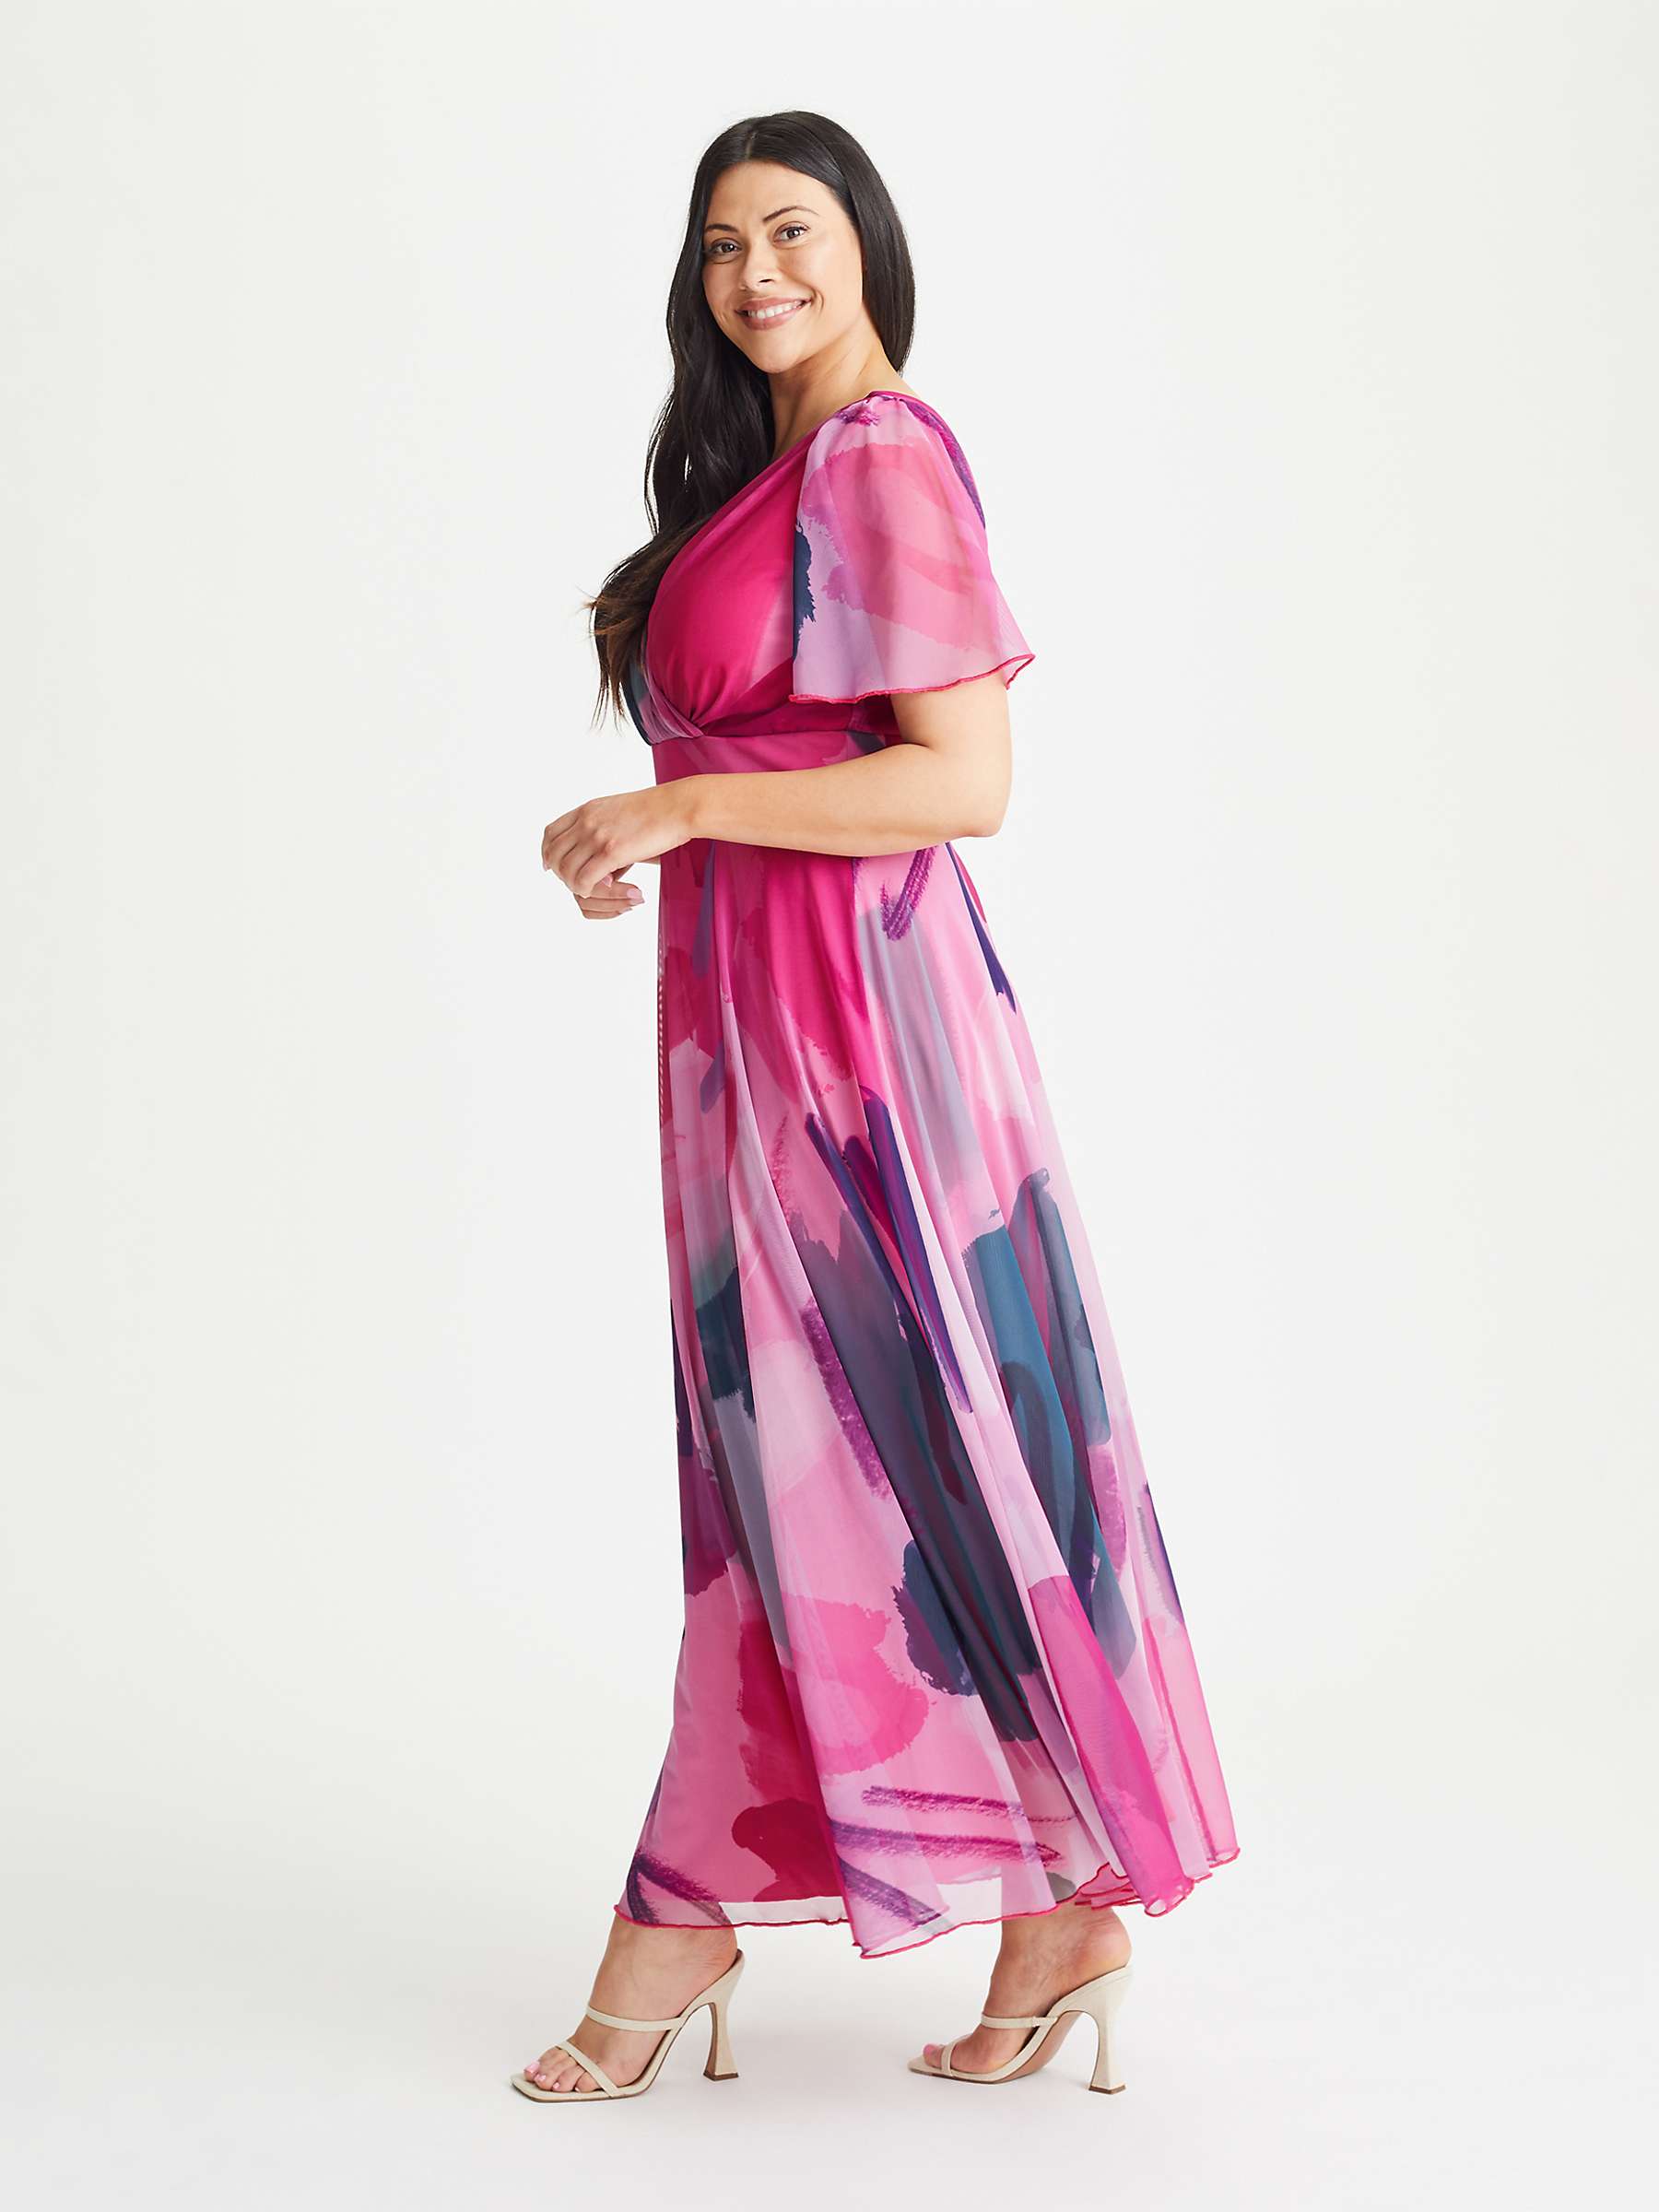 Buy Scarlett & Jo Isabelle Abstract Print Maxi Dress, Pink/Multi Online at johnlewis.com